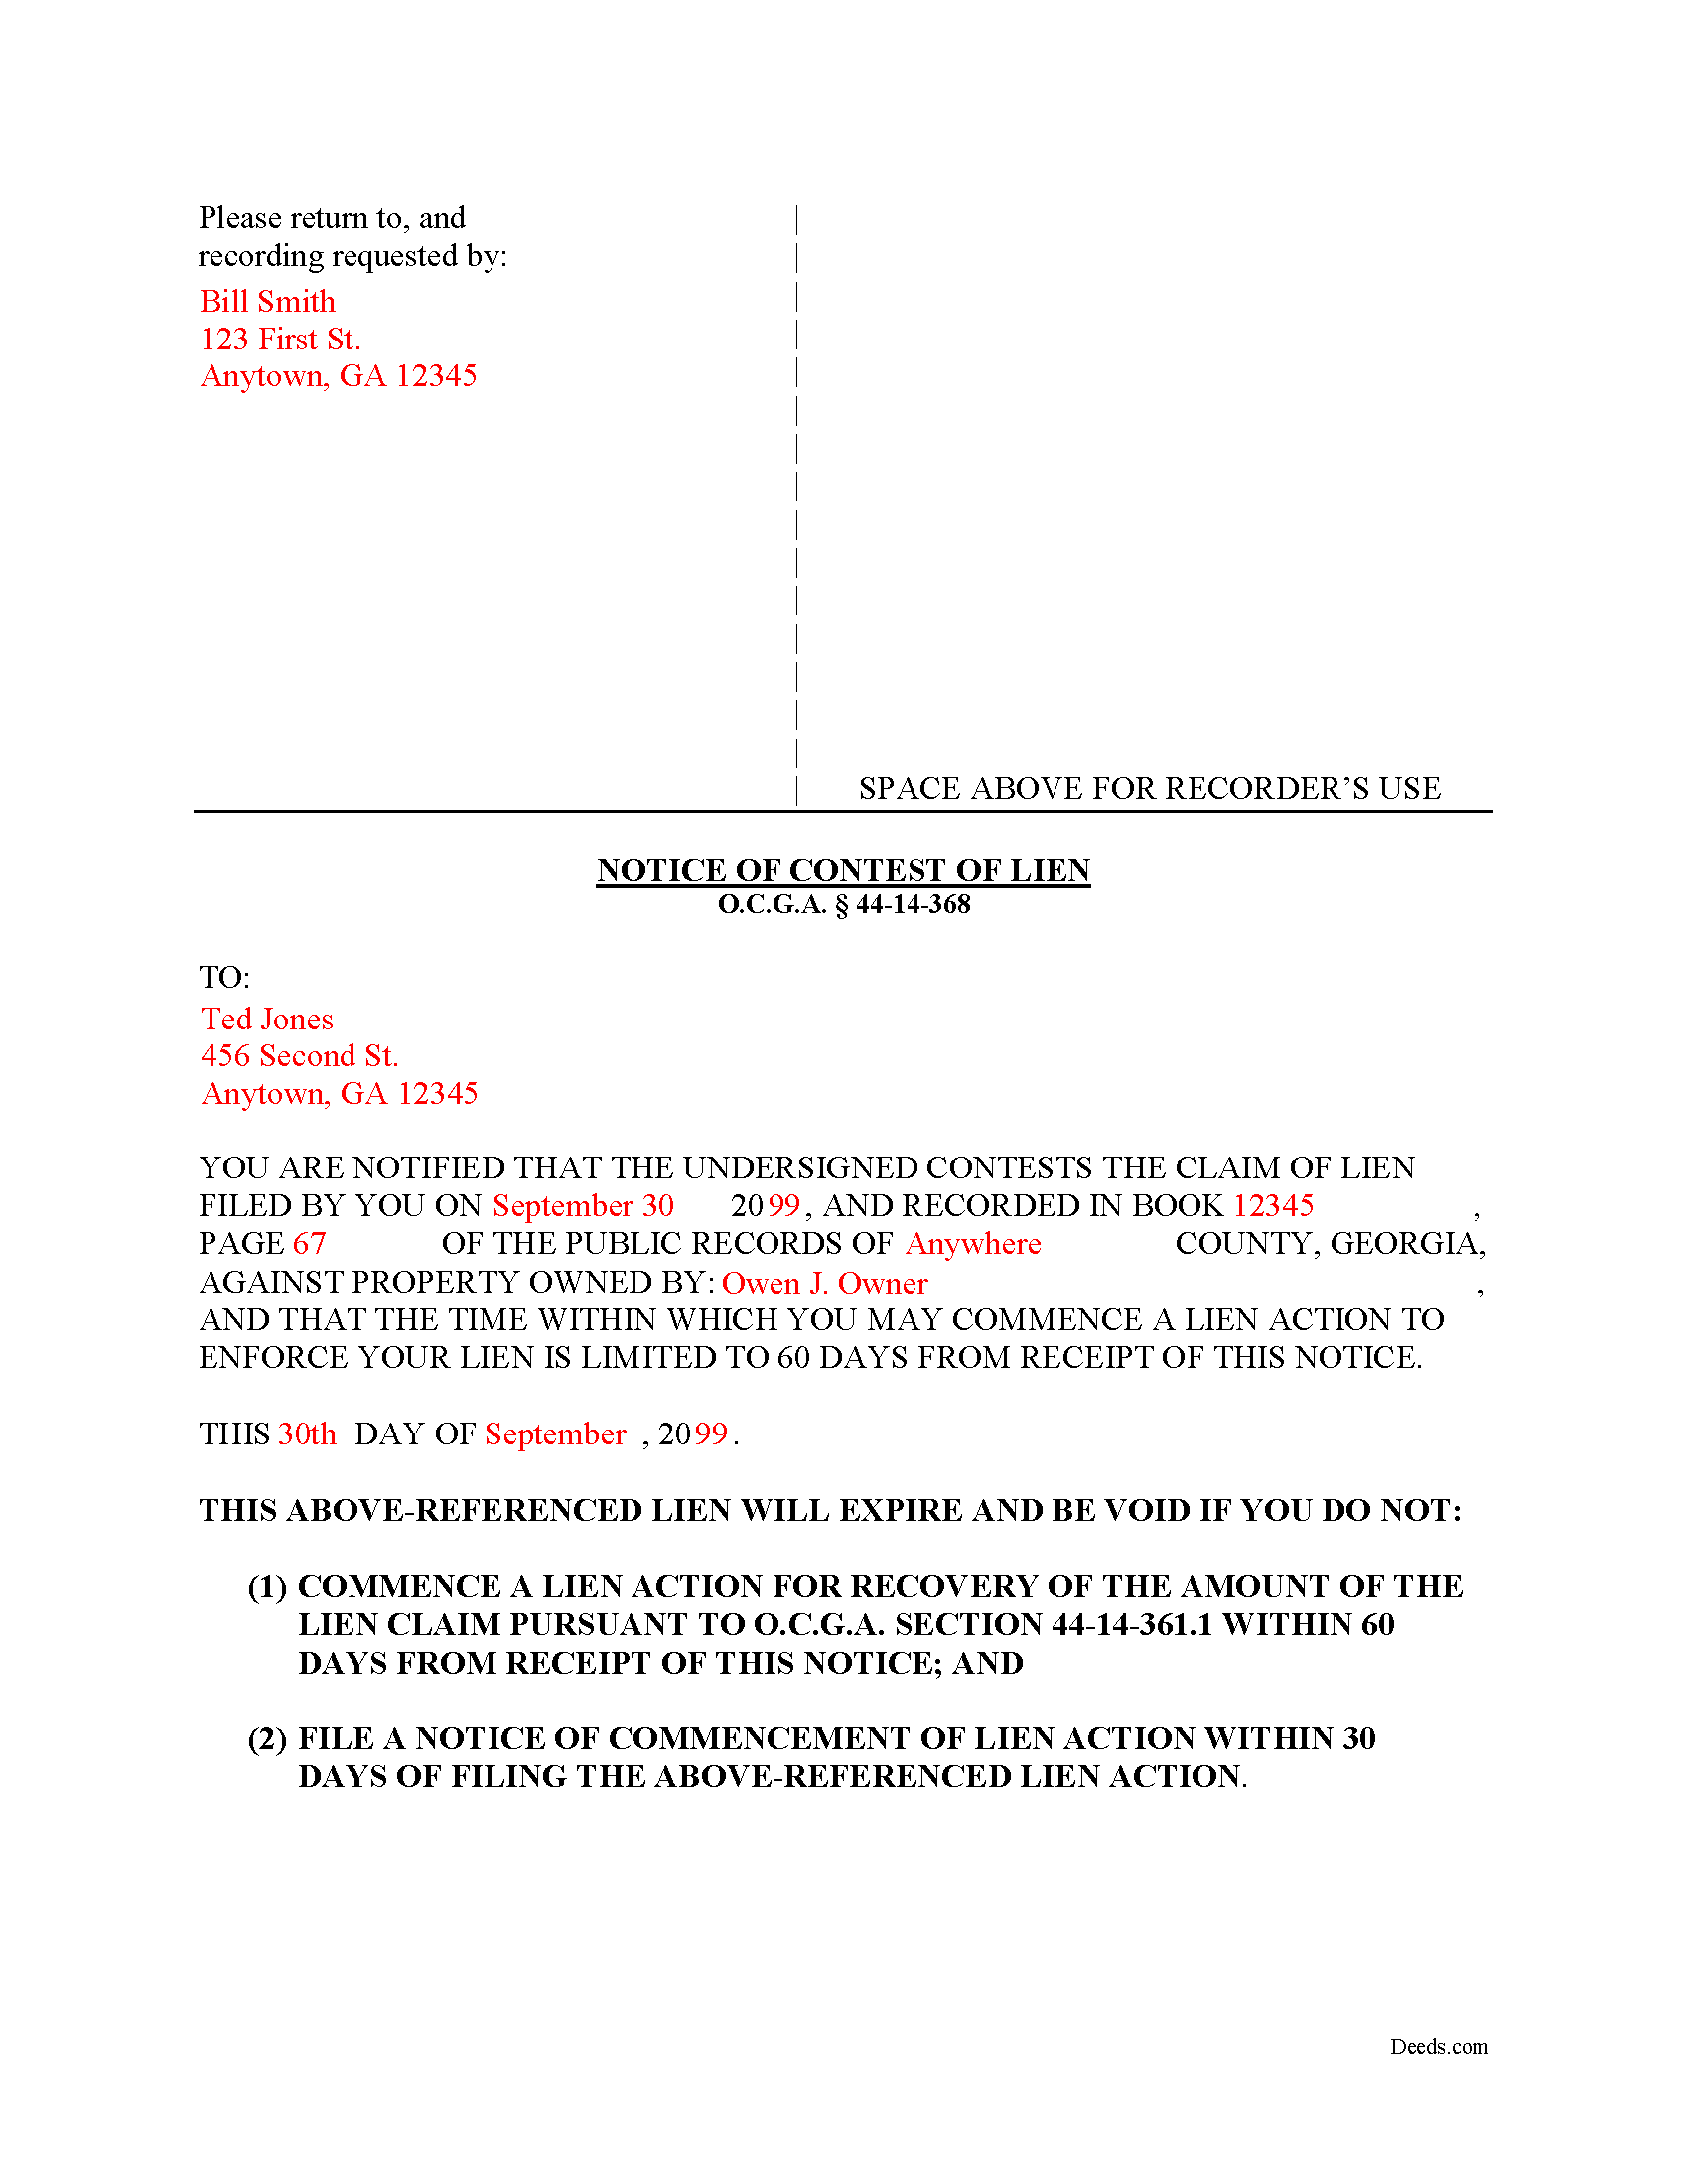 Completed Example of the Notice of Contest of Lien Document